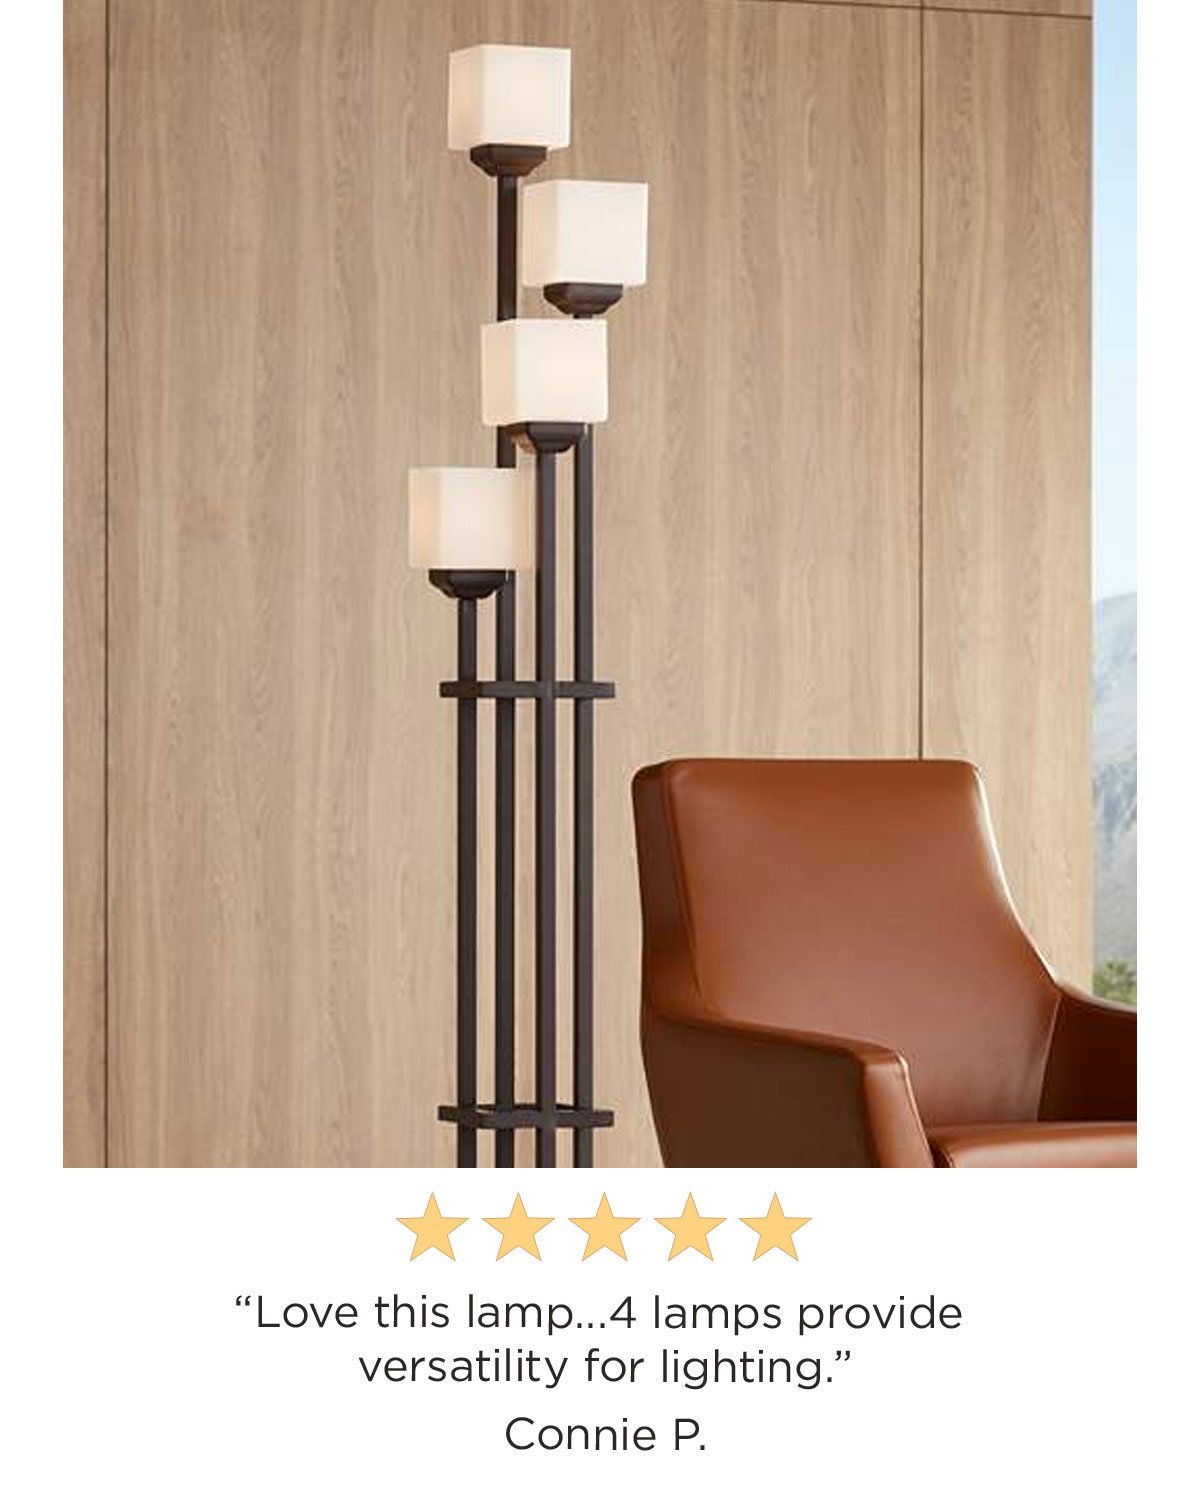 5 stars - "Love this lamp...4 lamps provide versatility for lighting." Connie P.